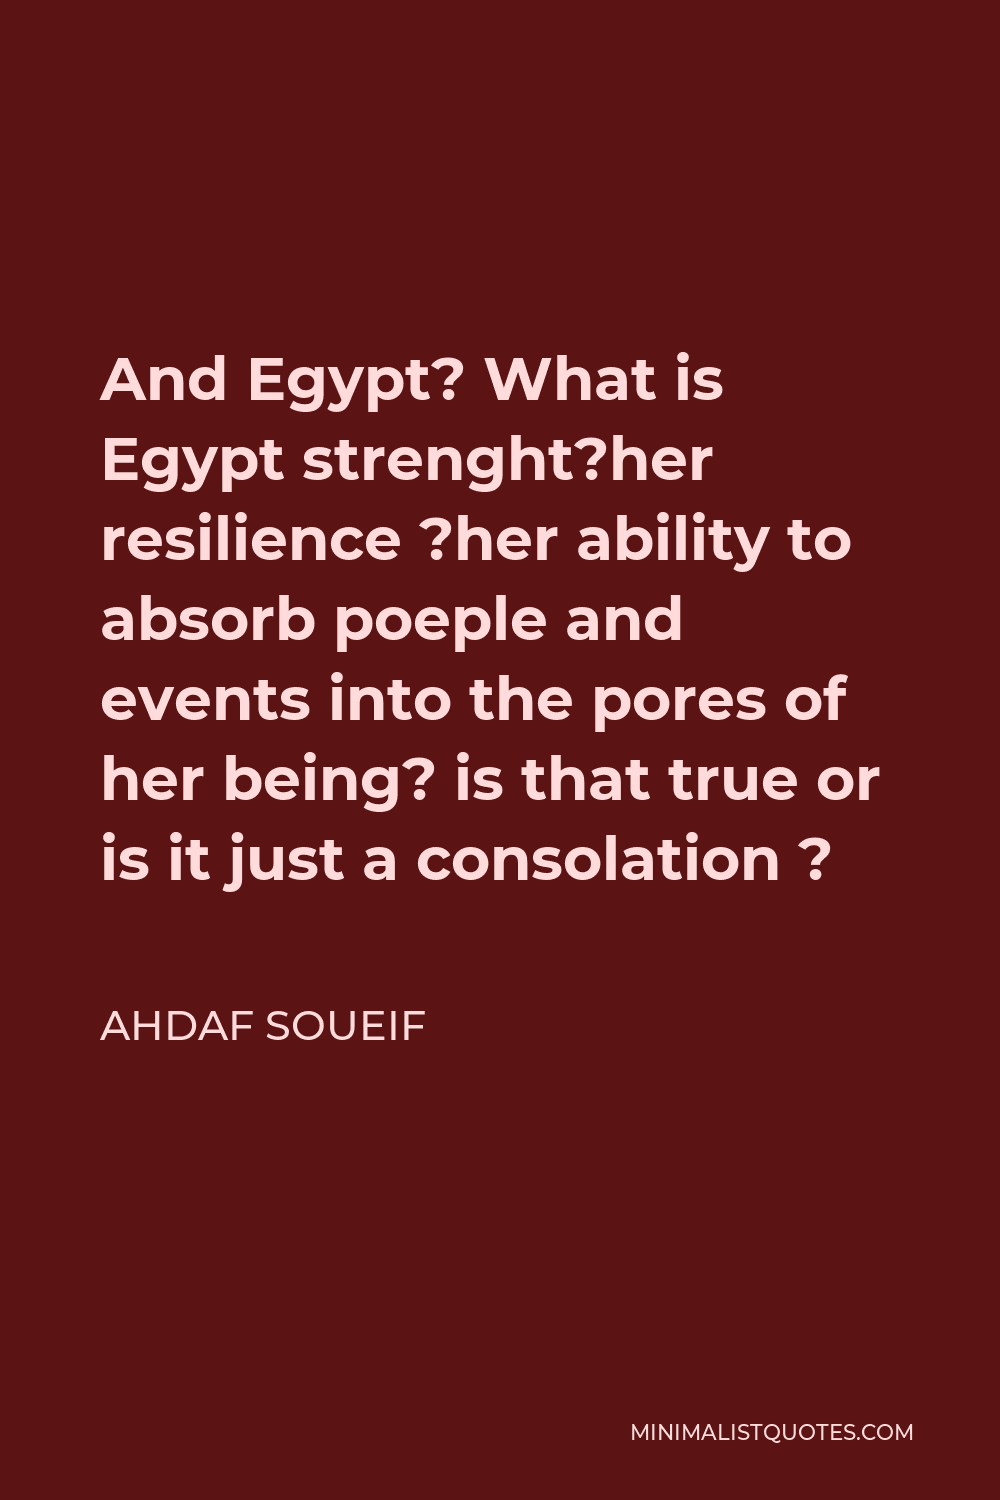 Ahdaf Soueif Quote - And Egypt? What is Egypt strenght?her resilience ?her ability to absorb poeple and events into the pores of her being? is that true or is it just a consolation ?